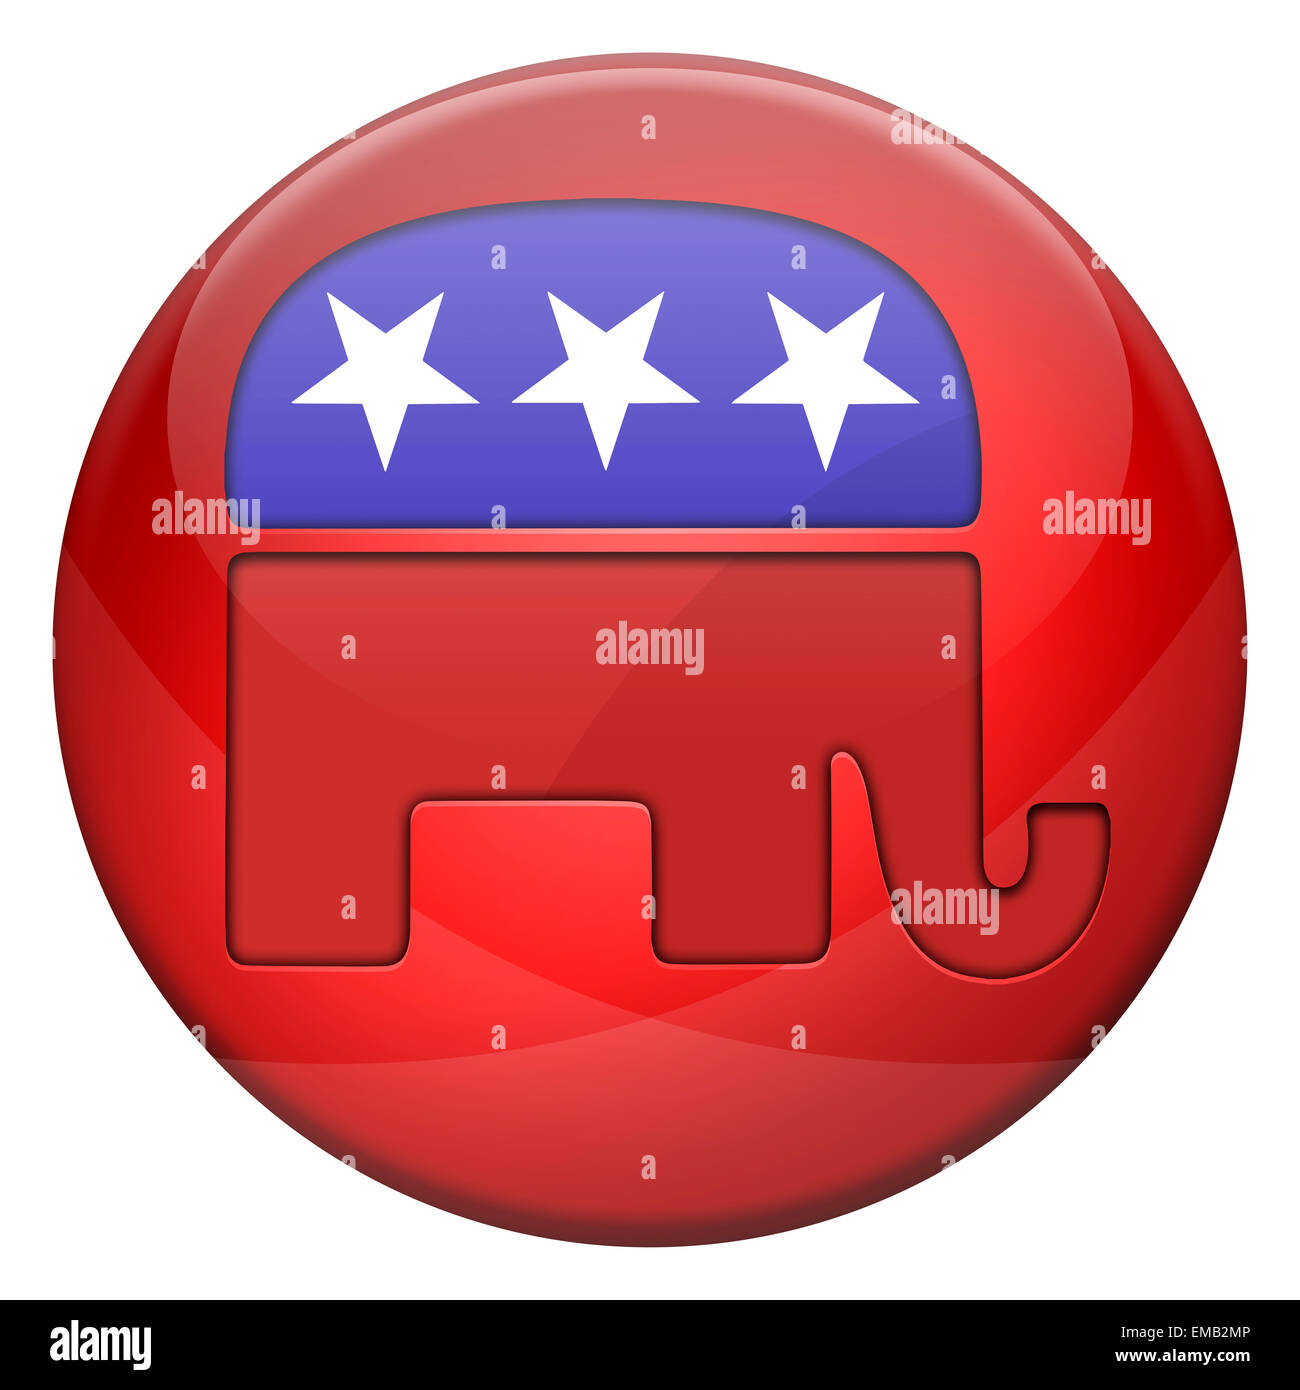 Elections button shape with Republican party icon Stock Photo